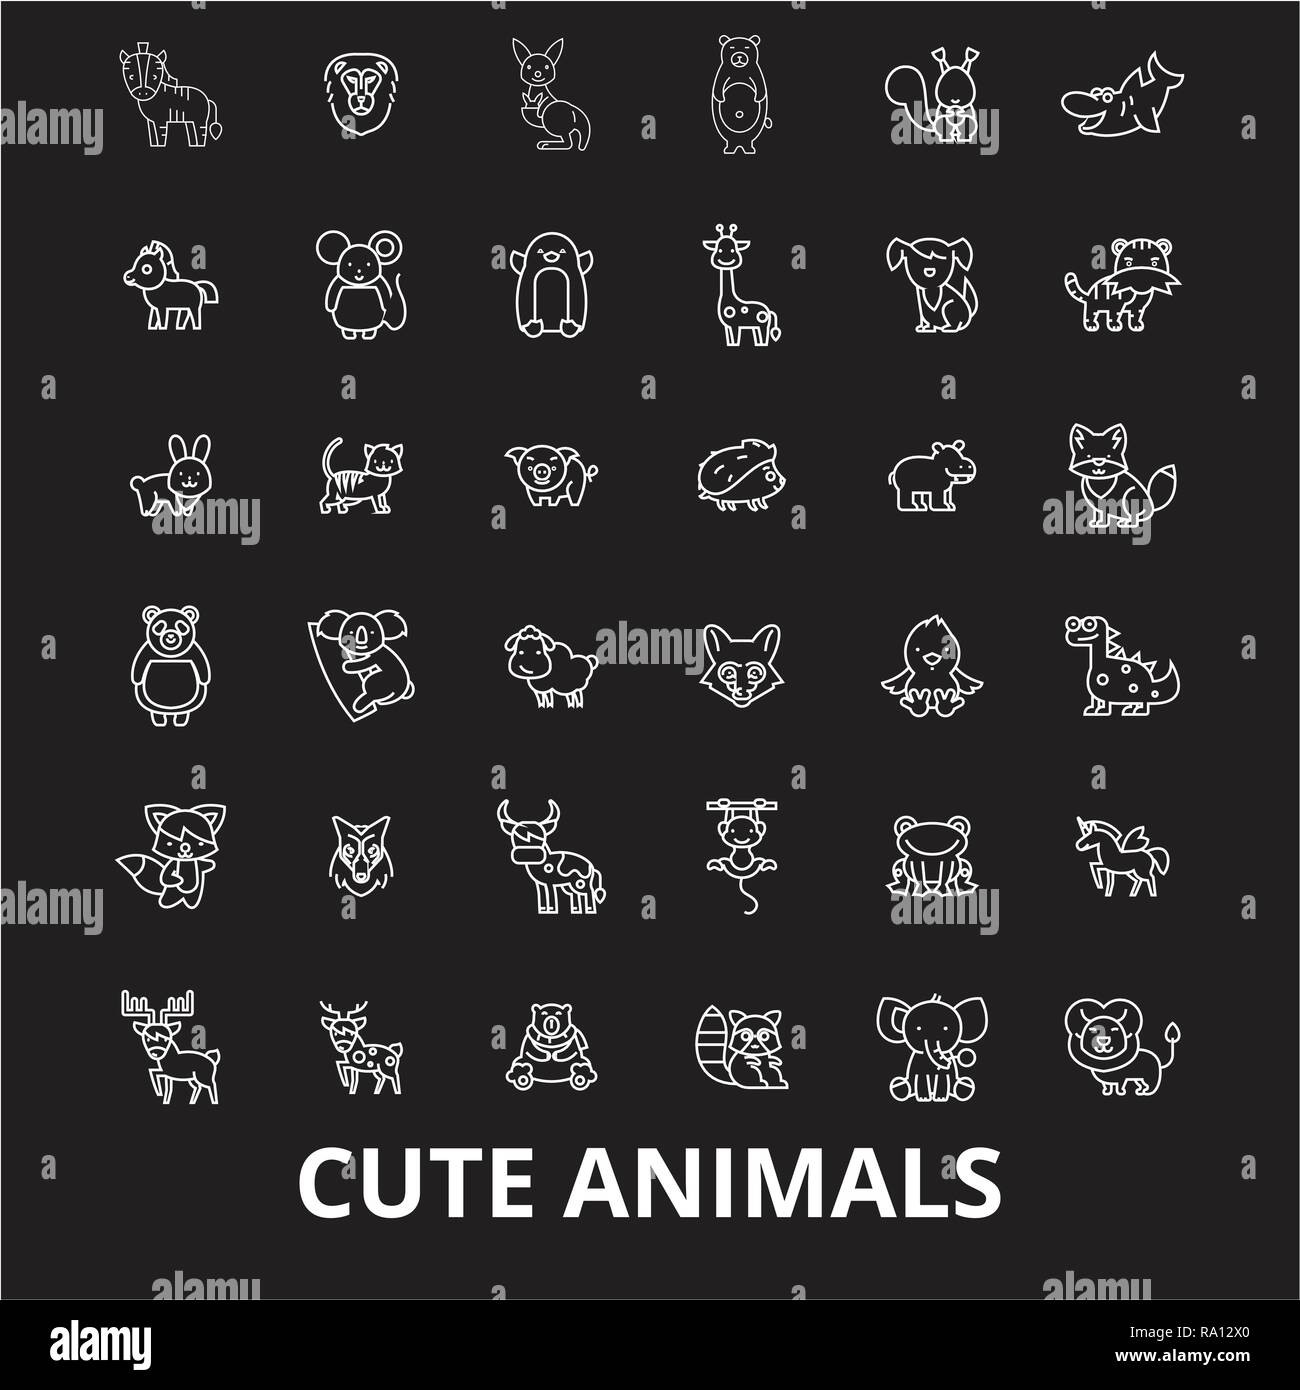 Cute animals editable line icons vector set on black background ...